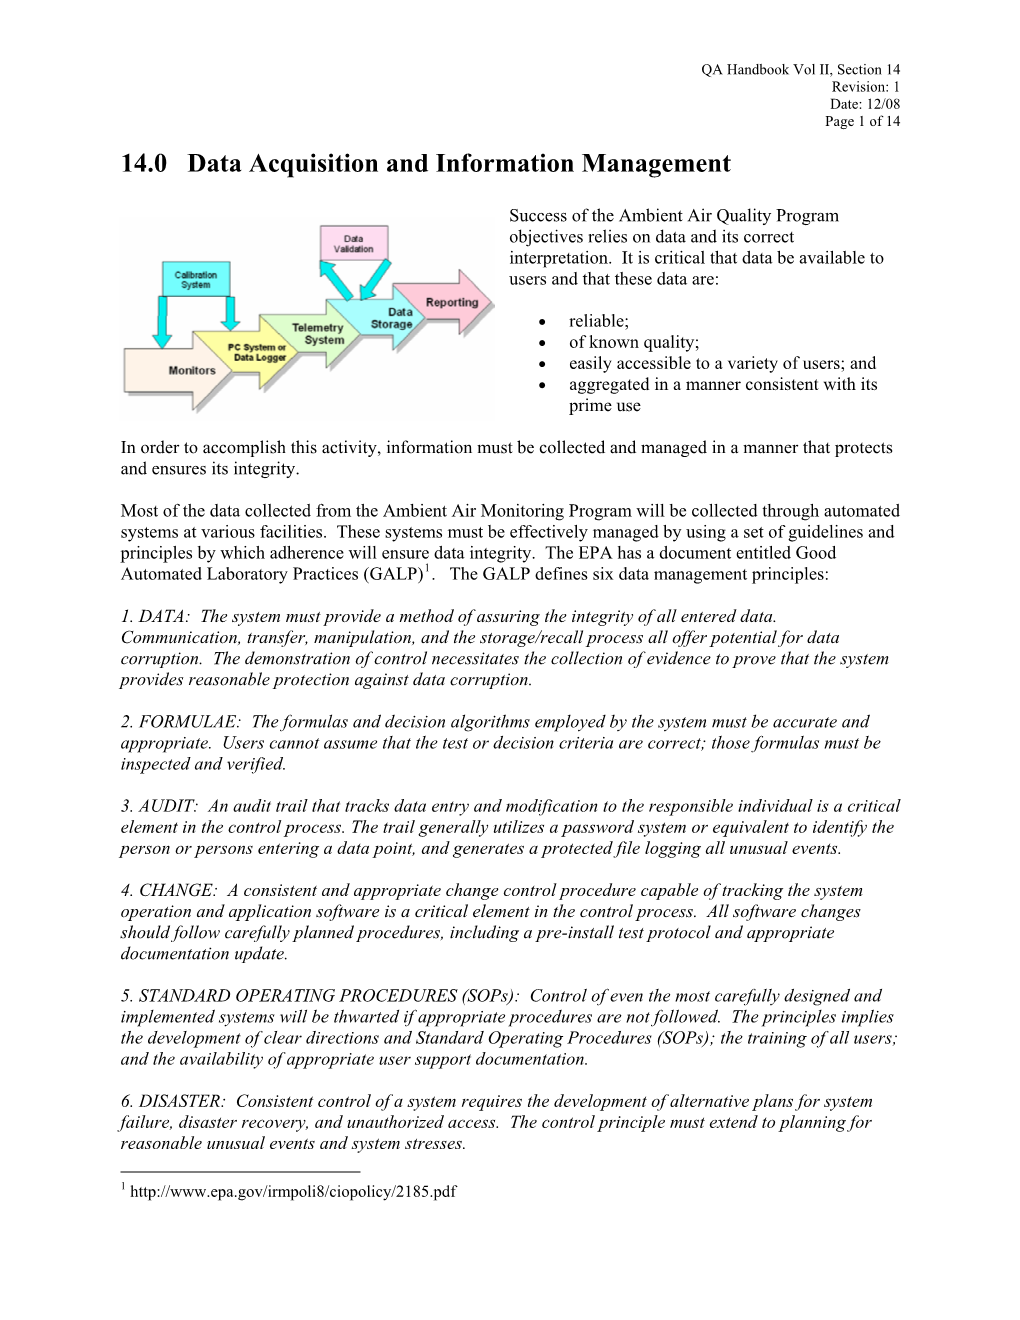 14.0 Data Acquisition and Information Management